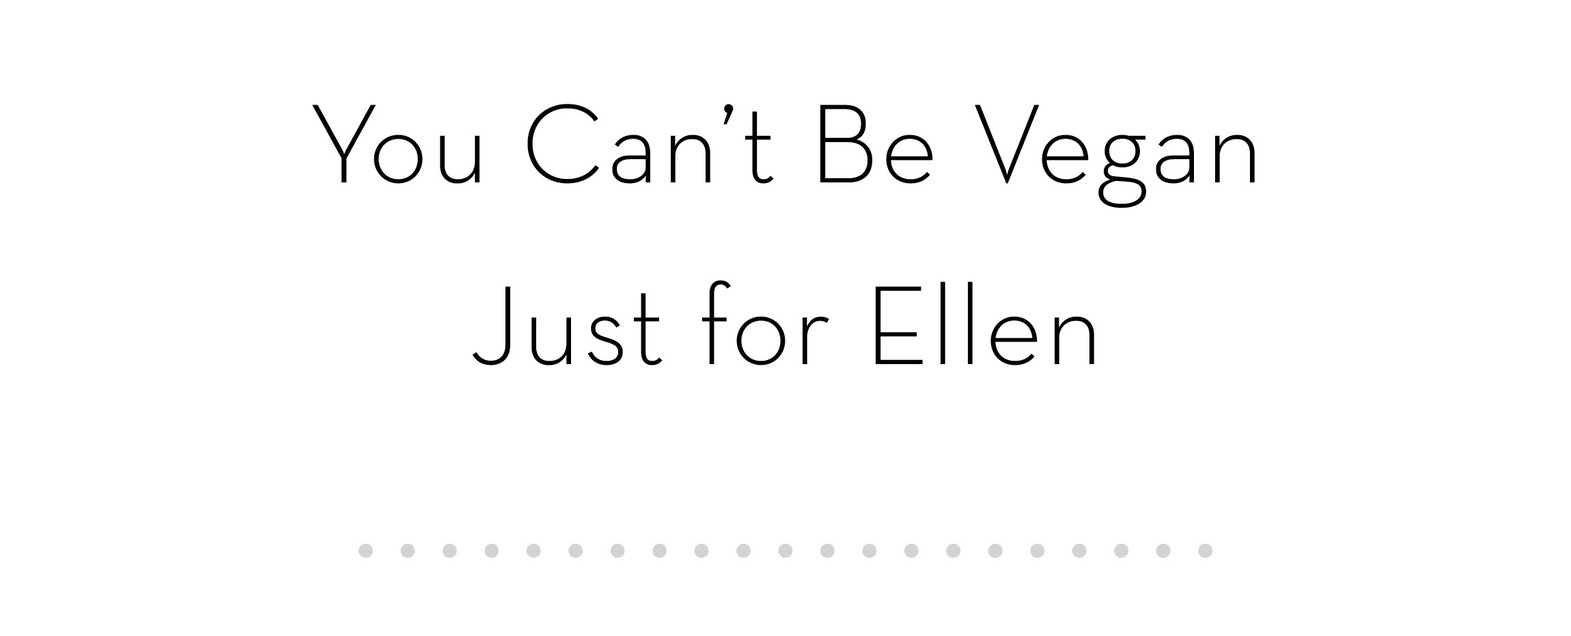 You Can’t Be Vegan Just for Ellen